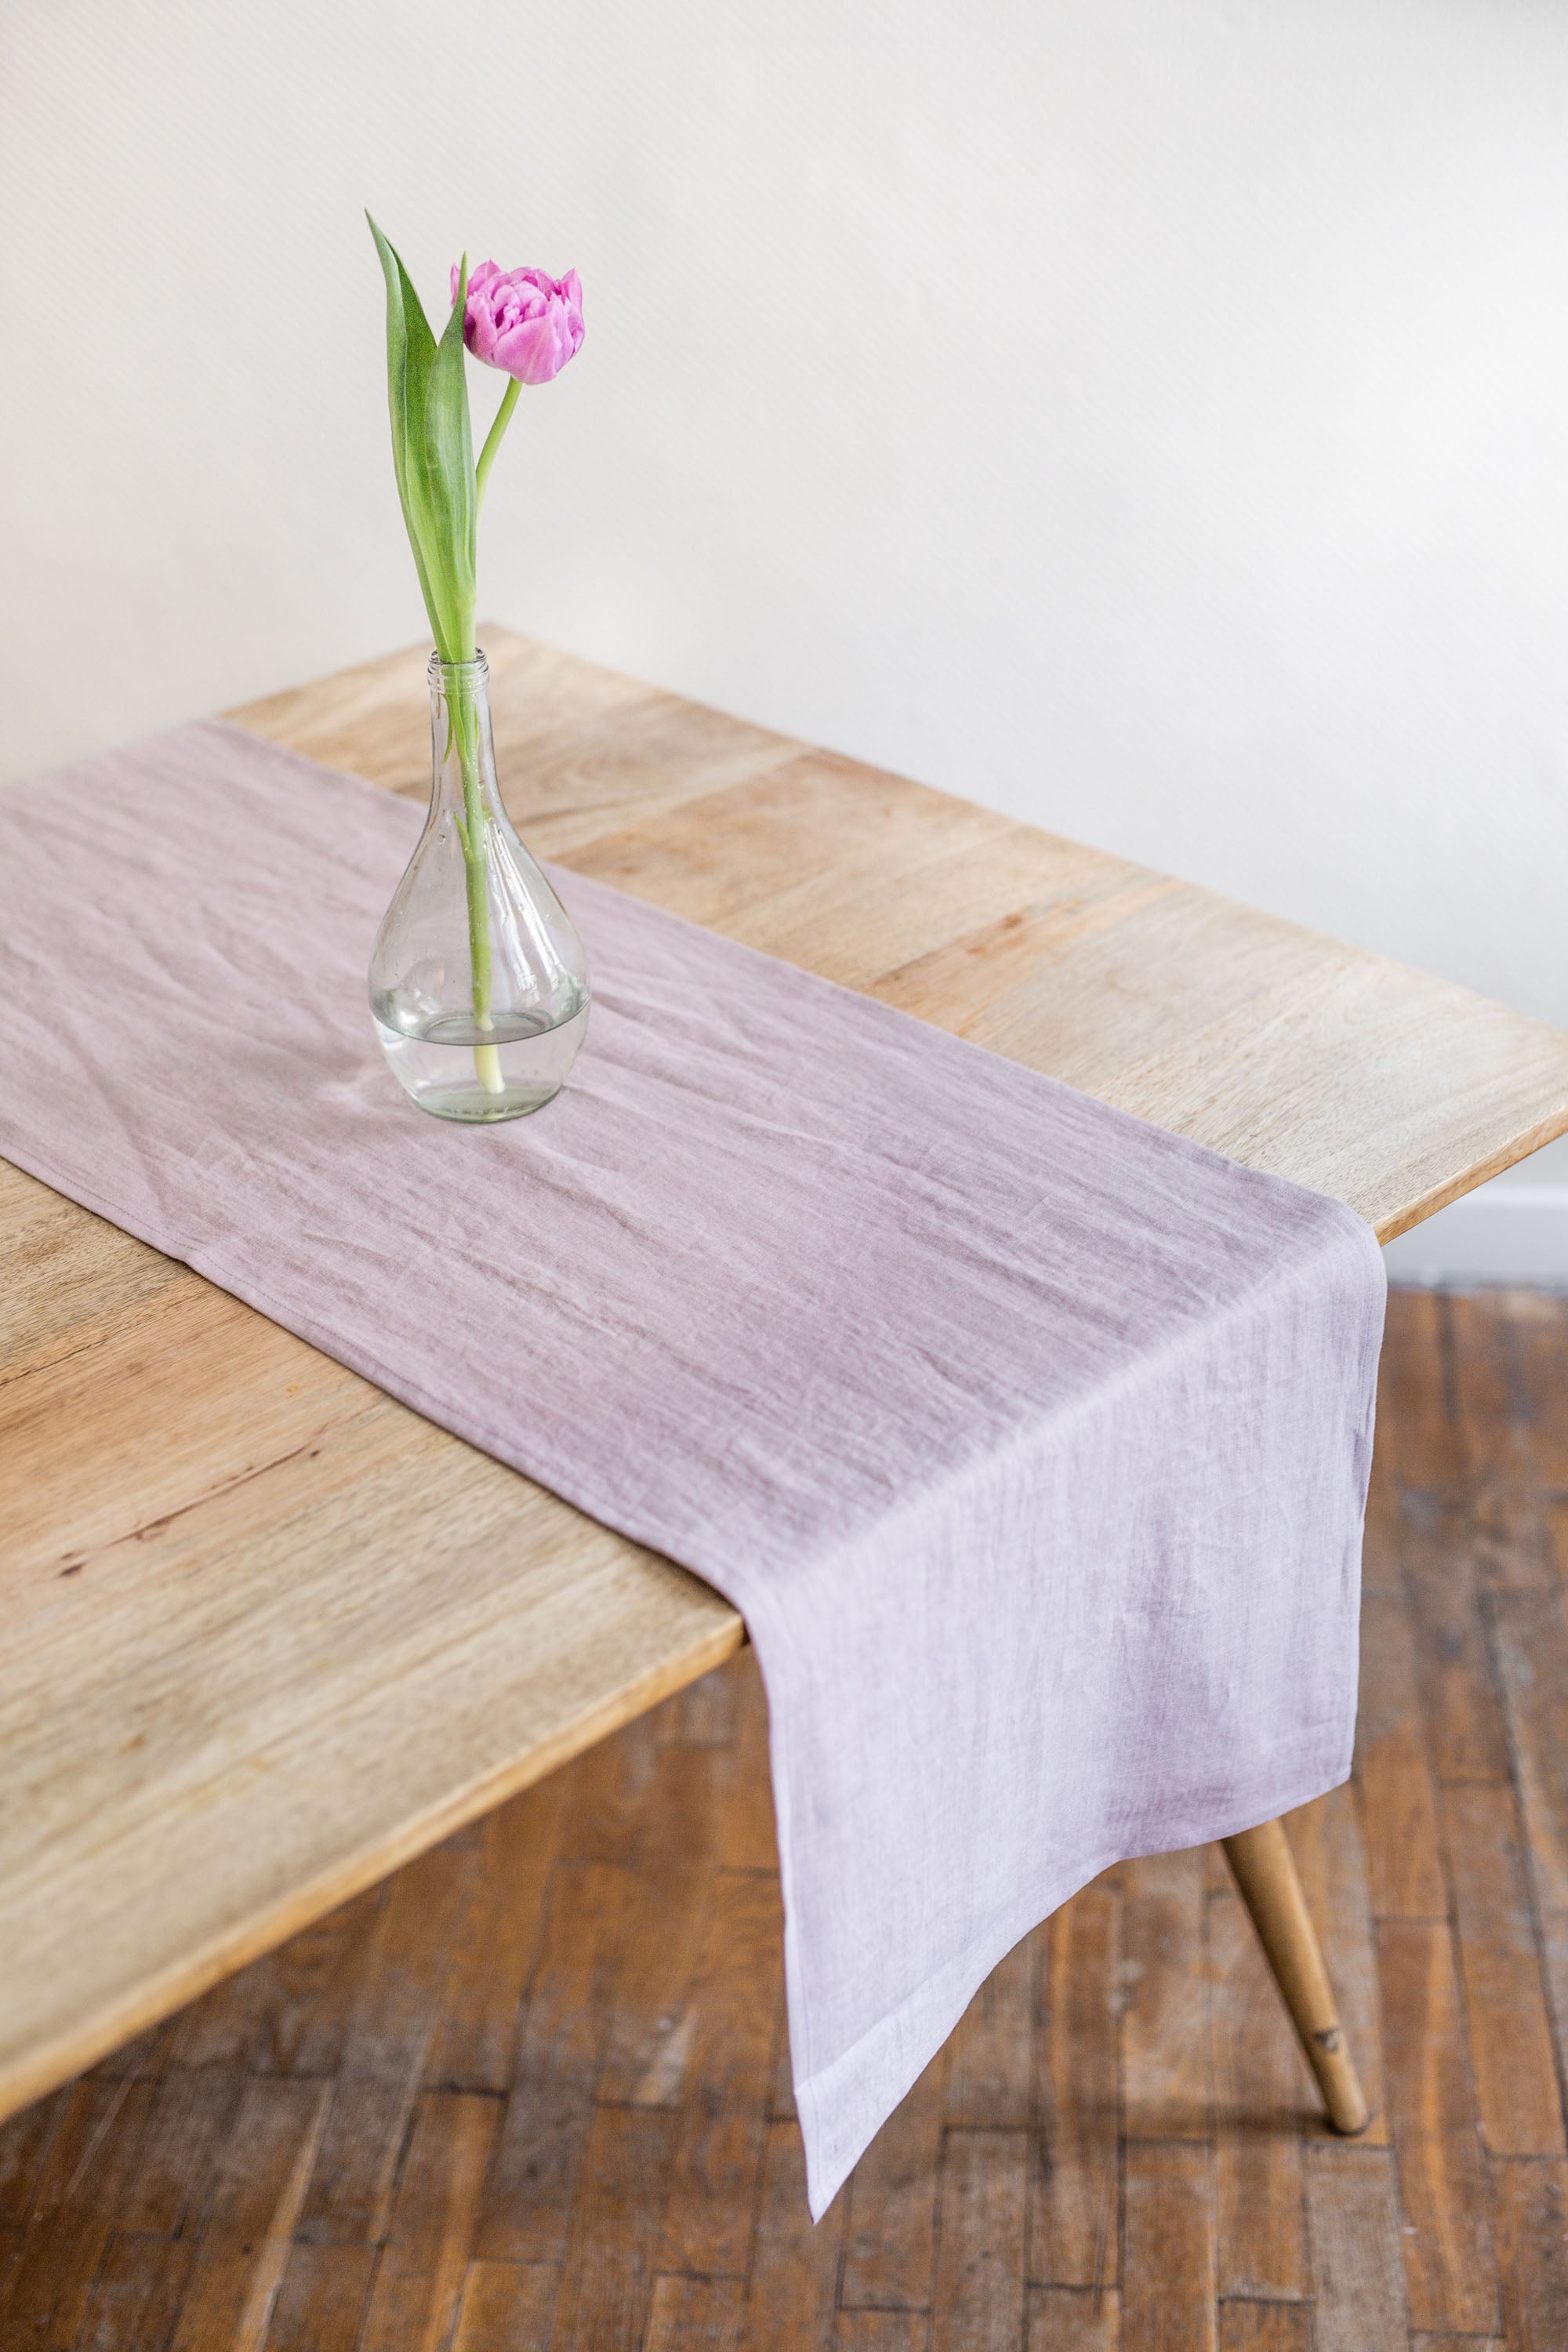 Rustic Dinner Table With Dusty Rose Linen Table Runner By AmourlInen